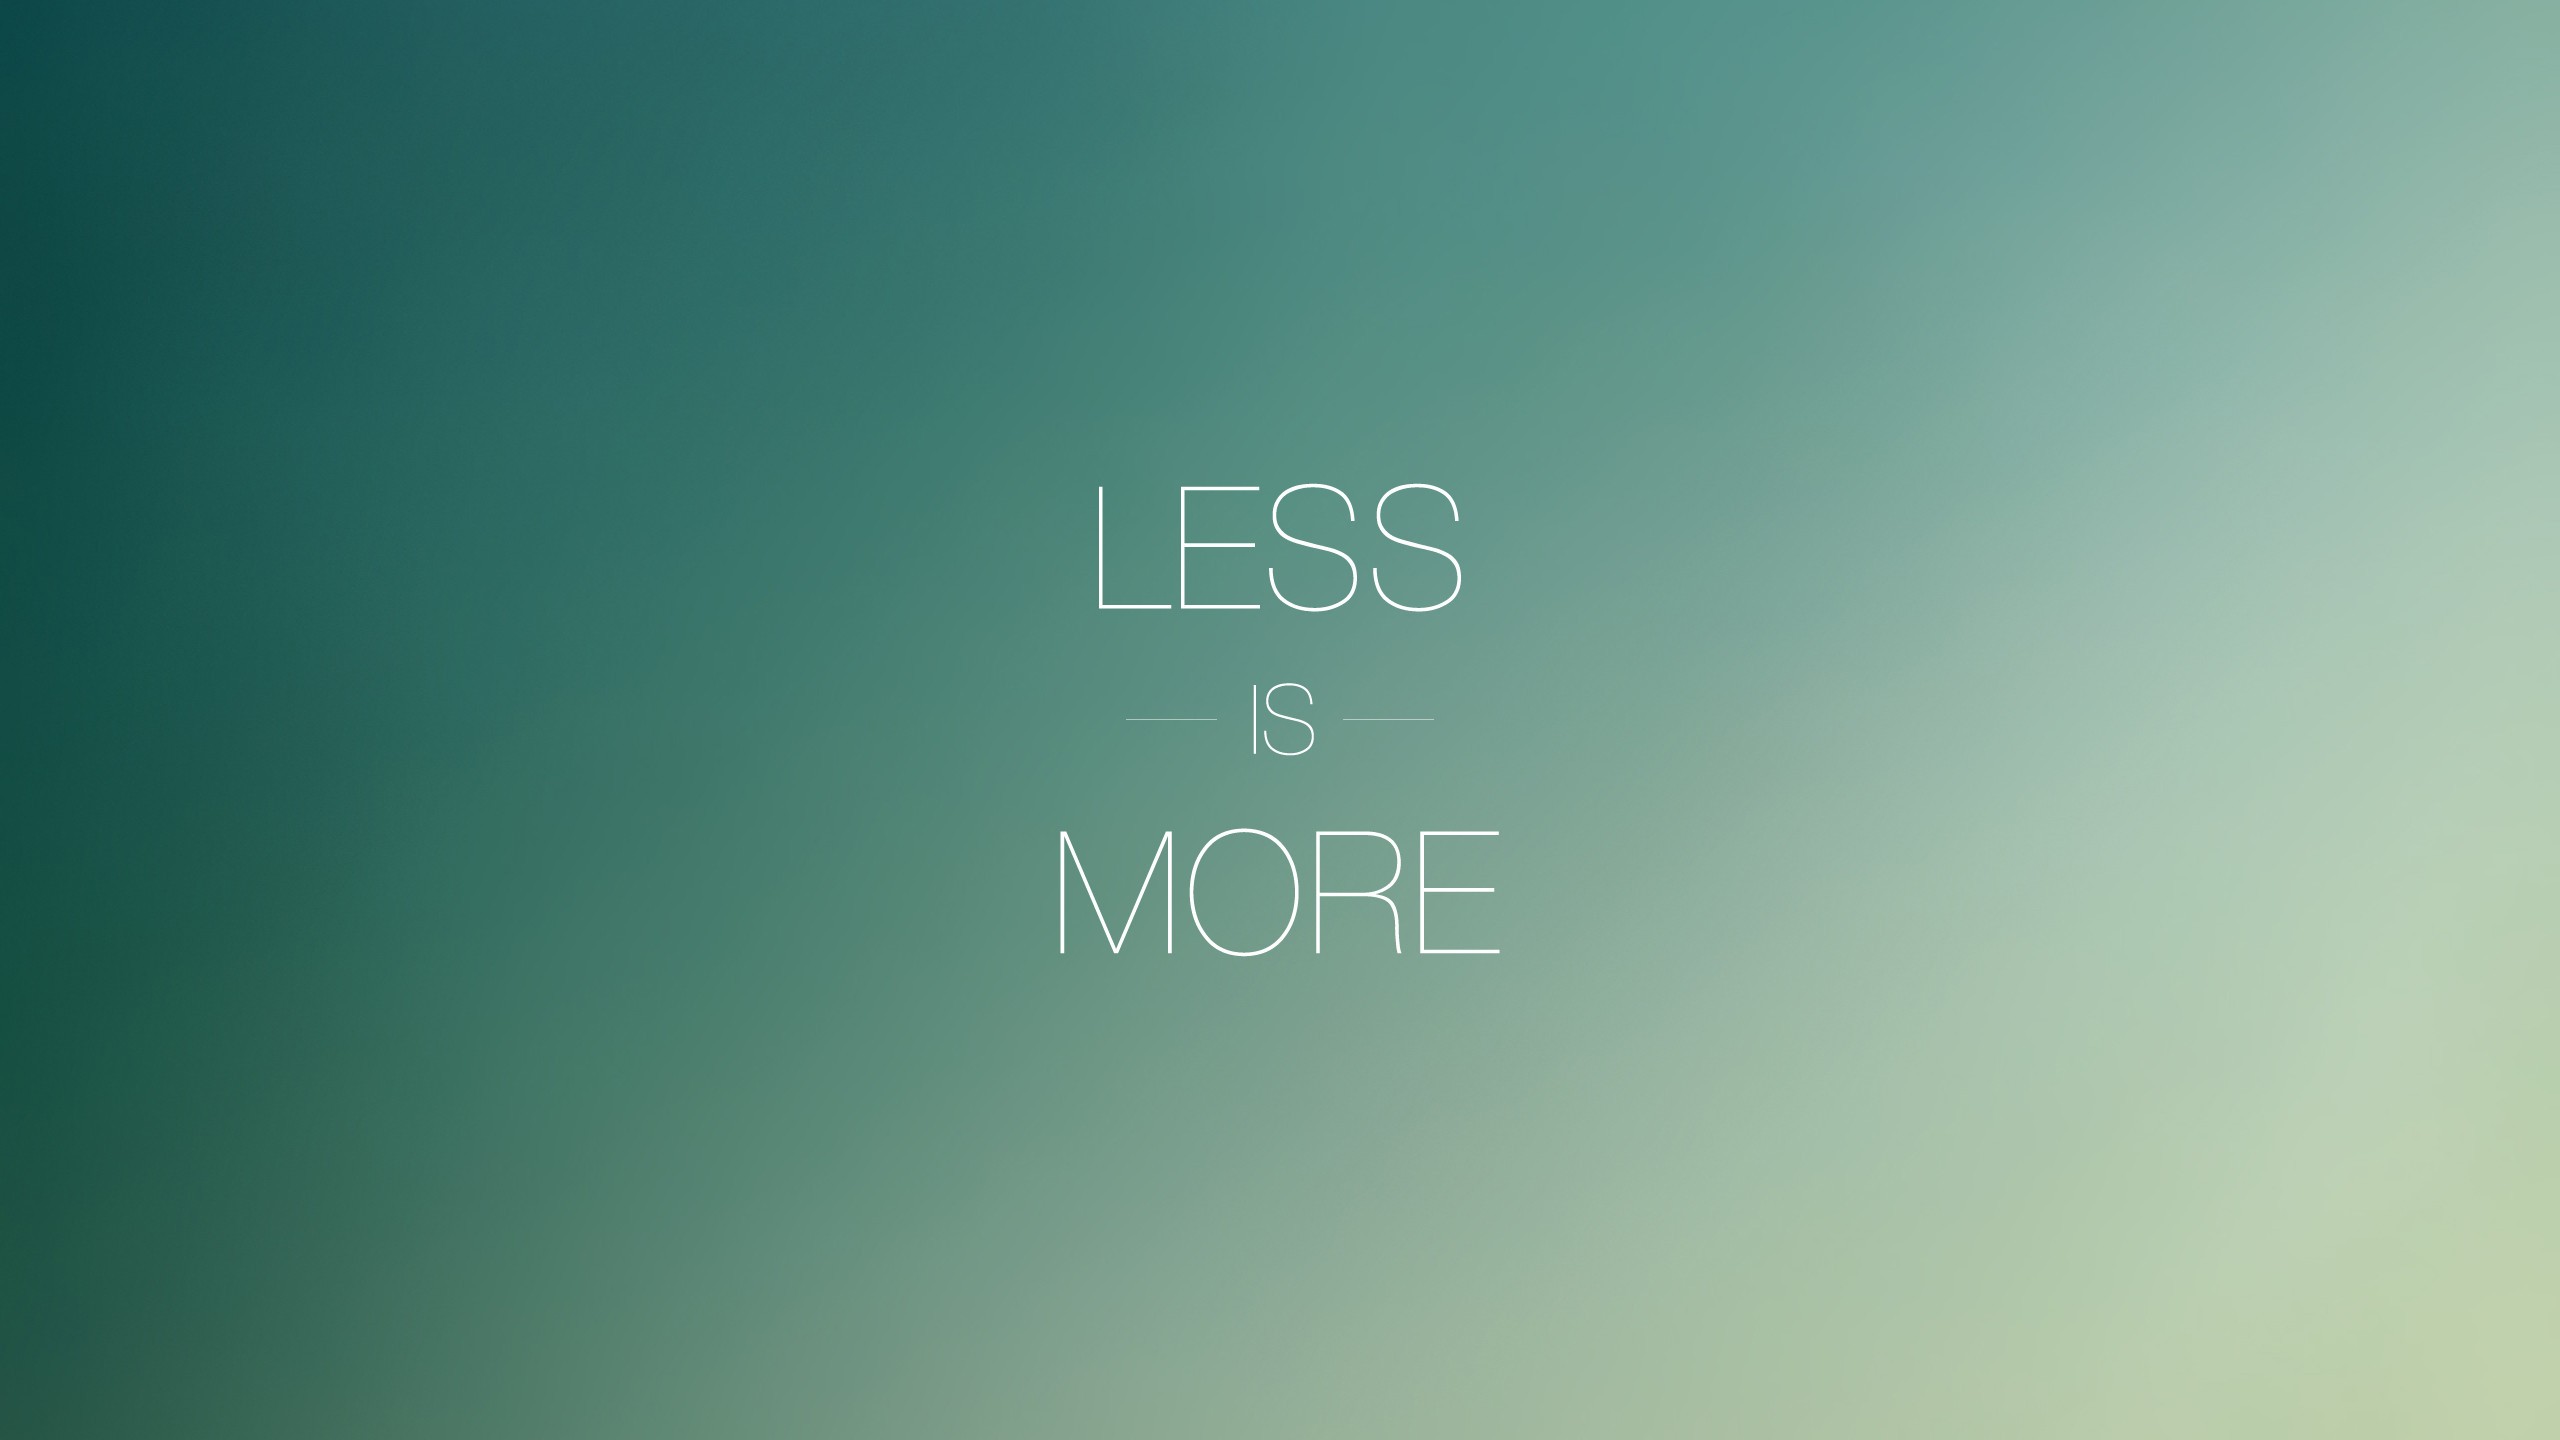 Ws Less is More 2560x1440.jpg